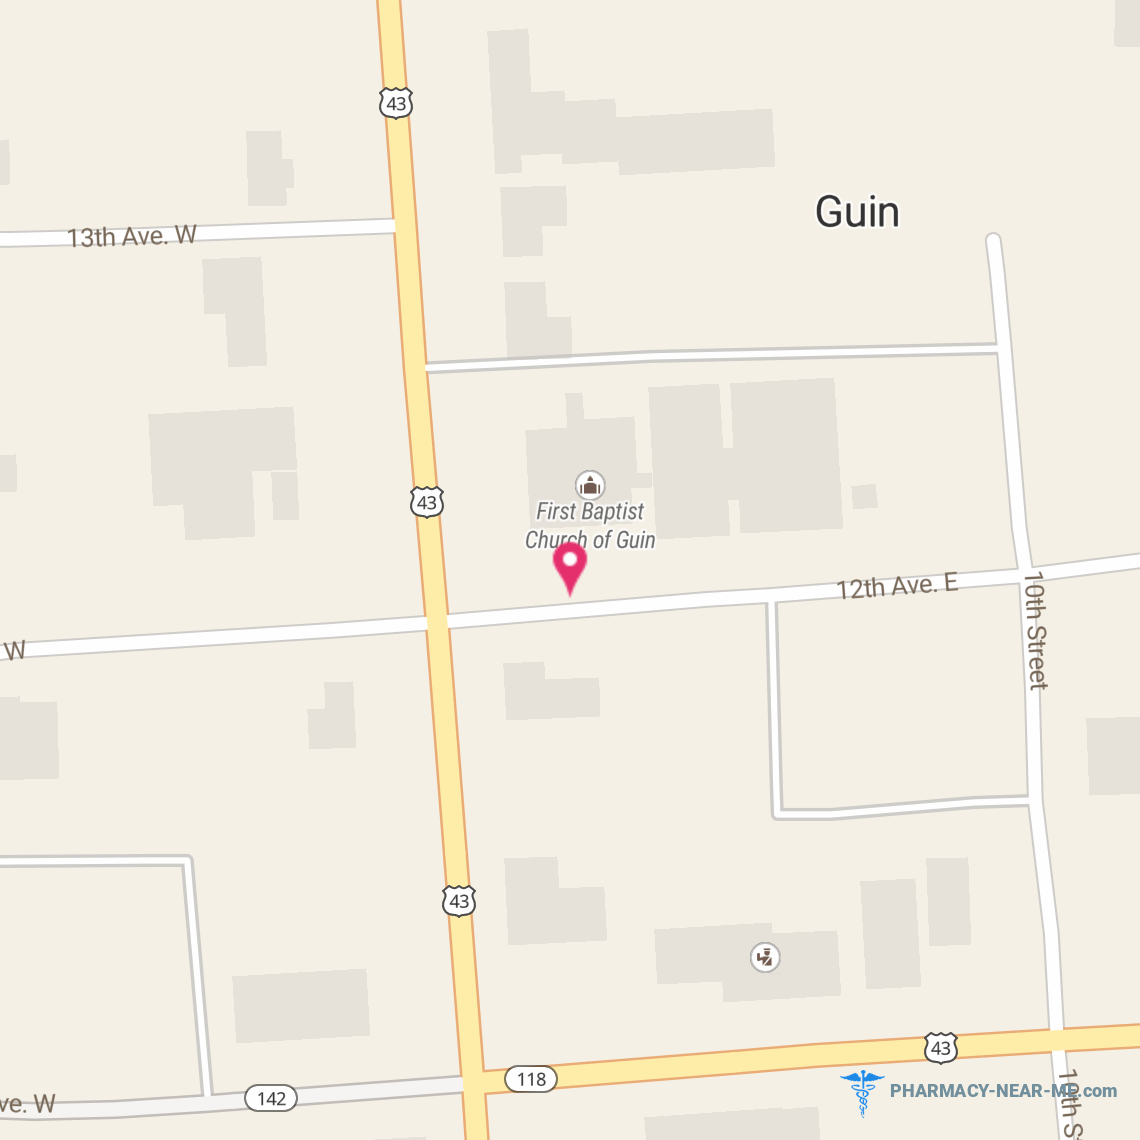 MCGUIRE DRUG COMPANY - Pharmacy Hours, Phone, Reviews & Information: 141 12th Avenue West, Guin, Alabama 35563, United States